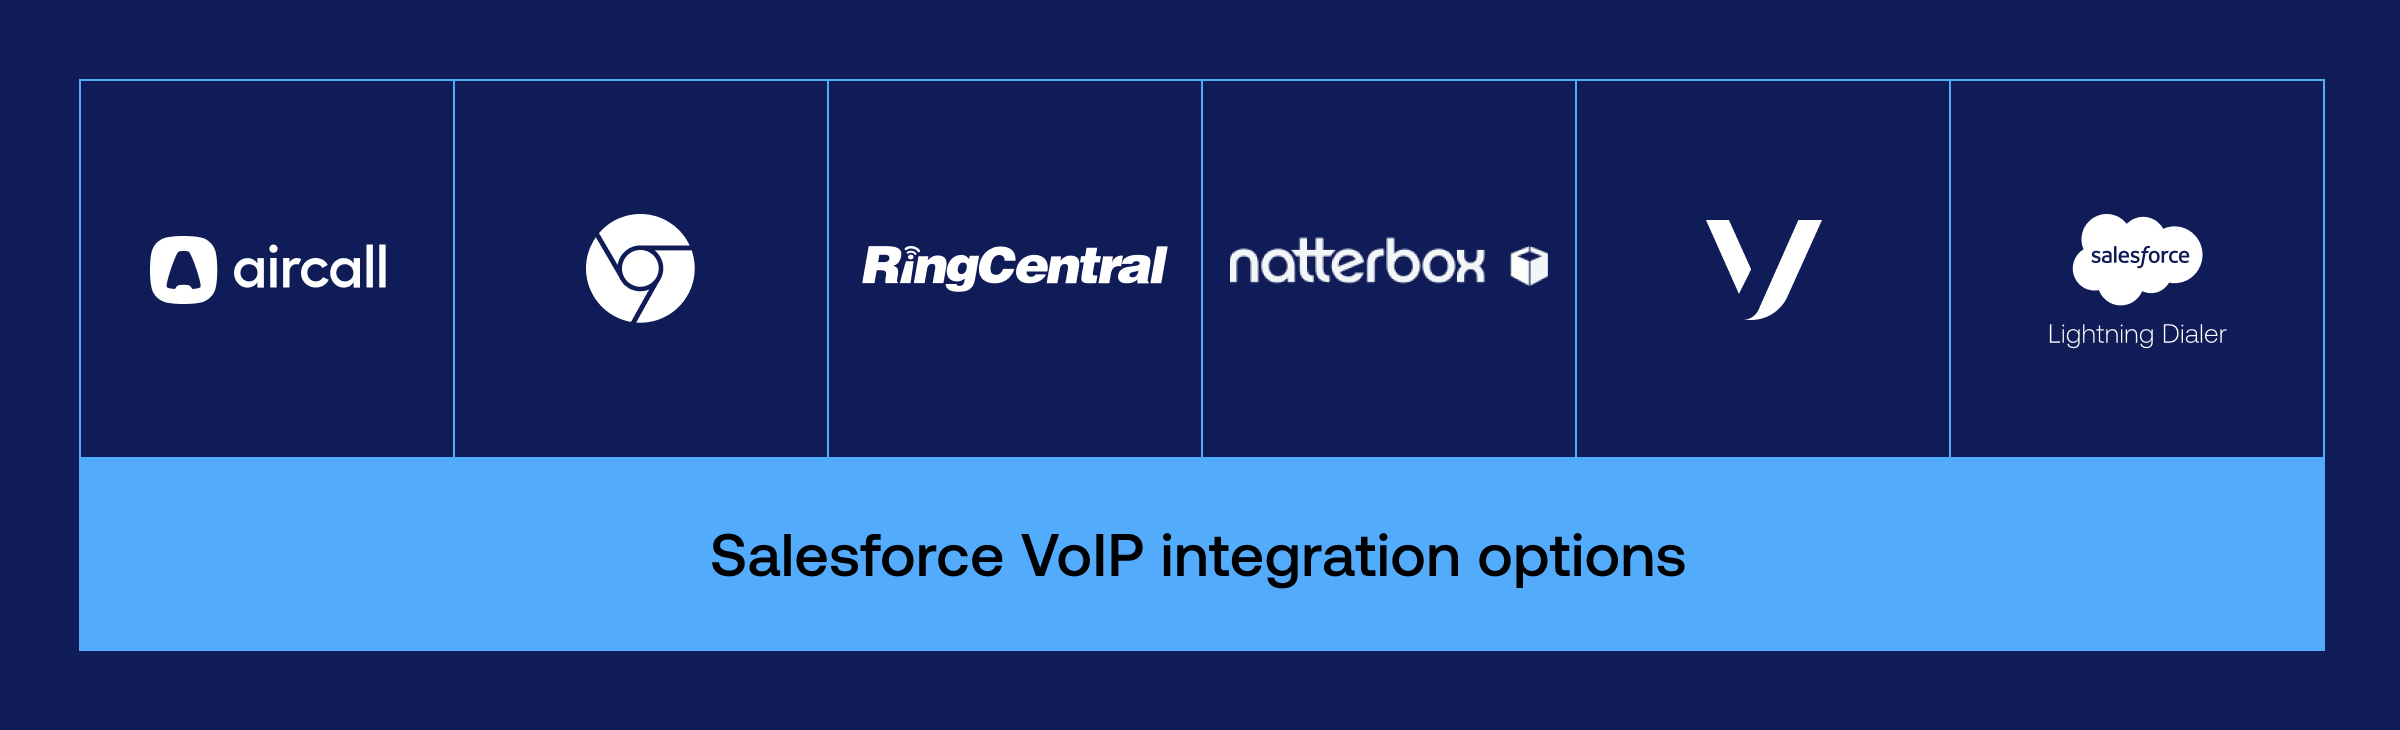 A beginner's guide to Salesforce telephony (CTI) and VoIP integration_02